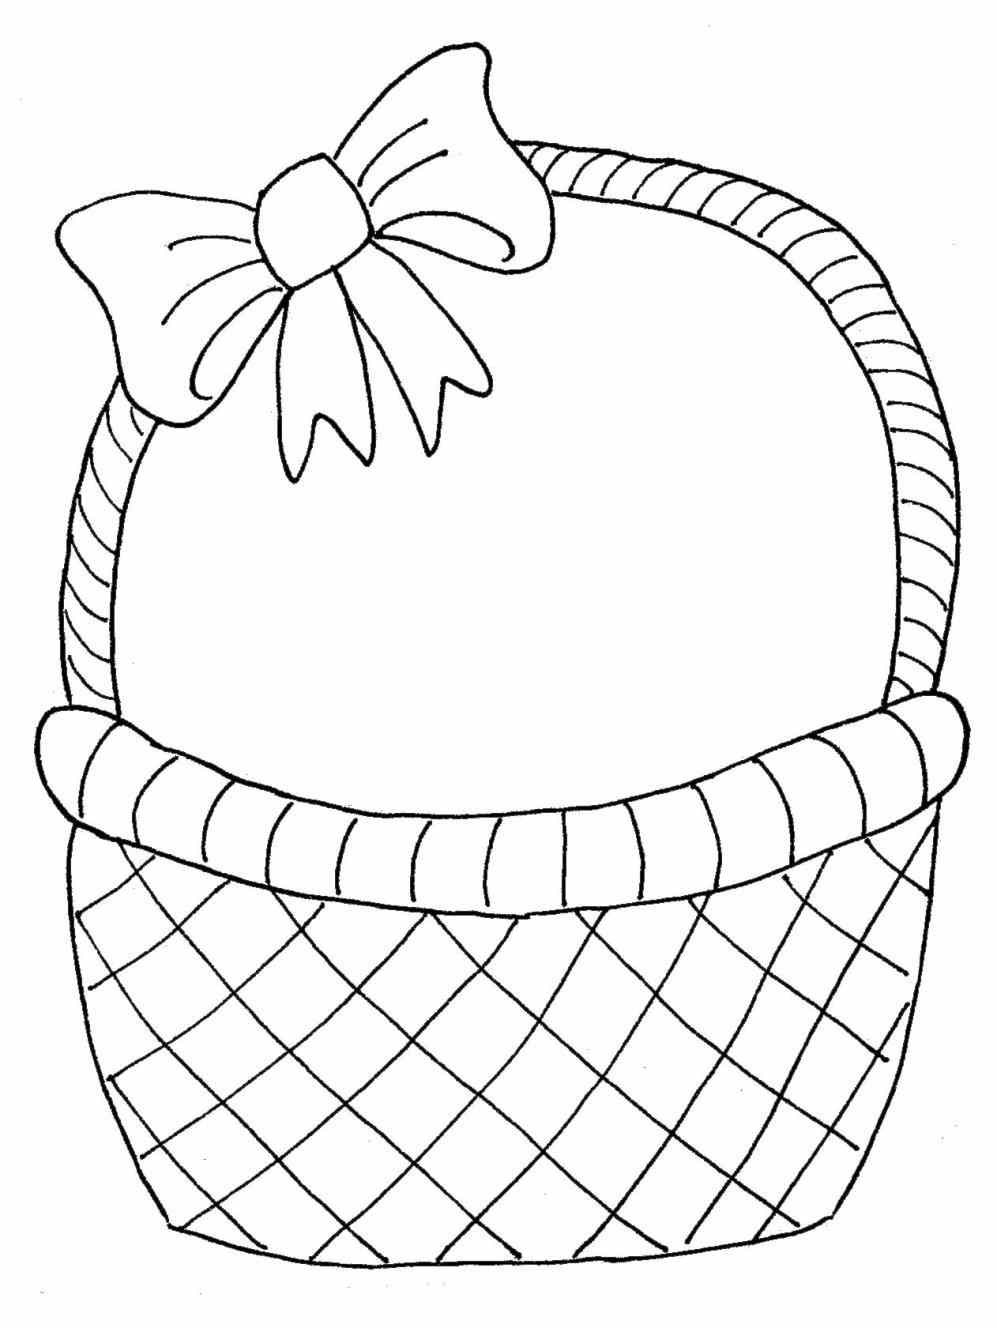 basket clipart black and white